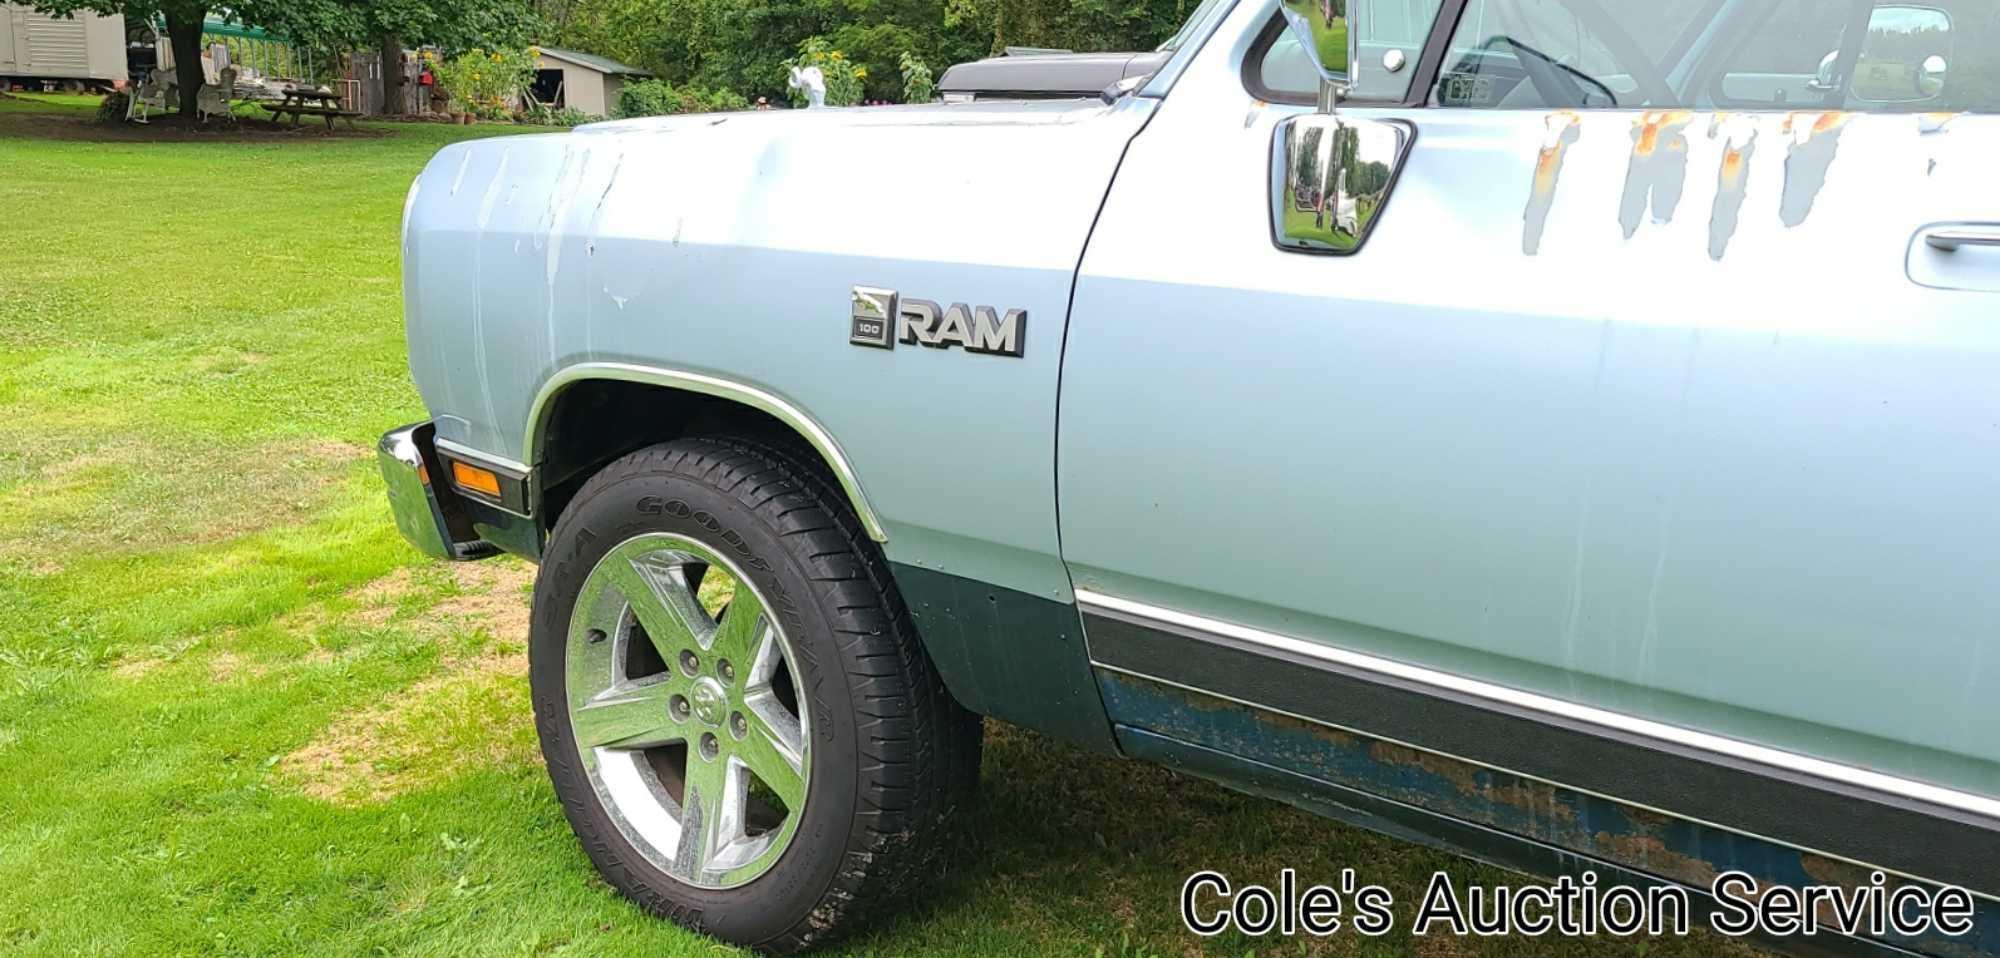 1989 Dodge Ram 100 pickup truck. Nice original truck with approximately 84,000 miles. 318 V8 engine